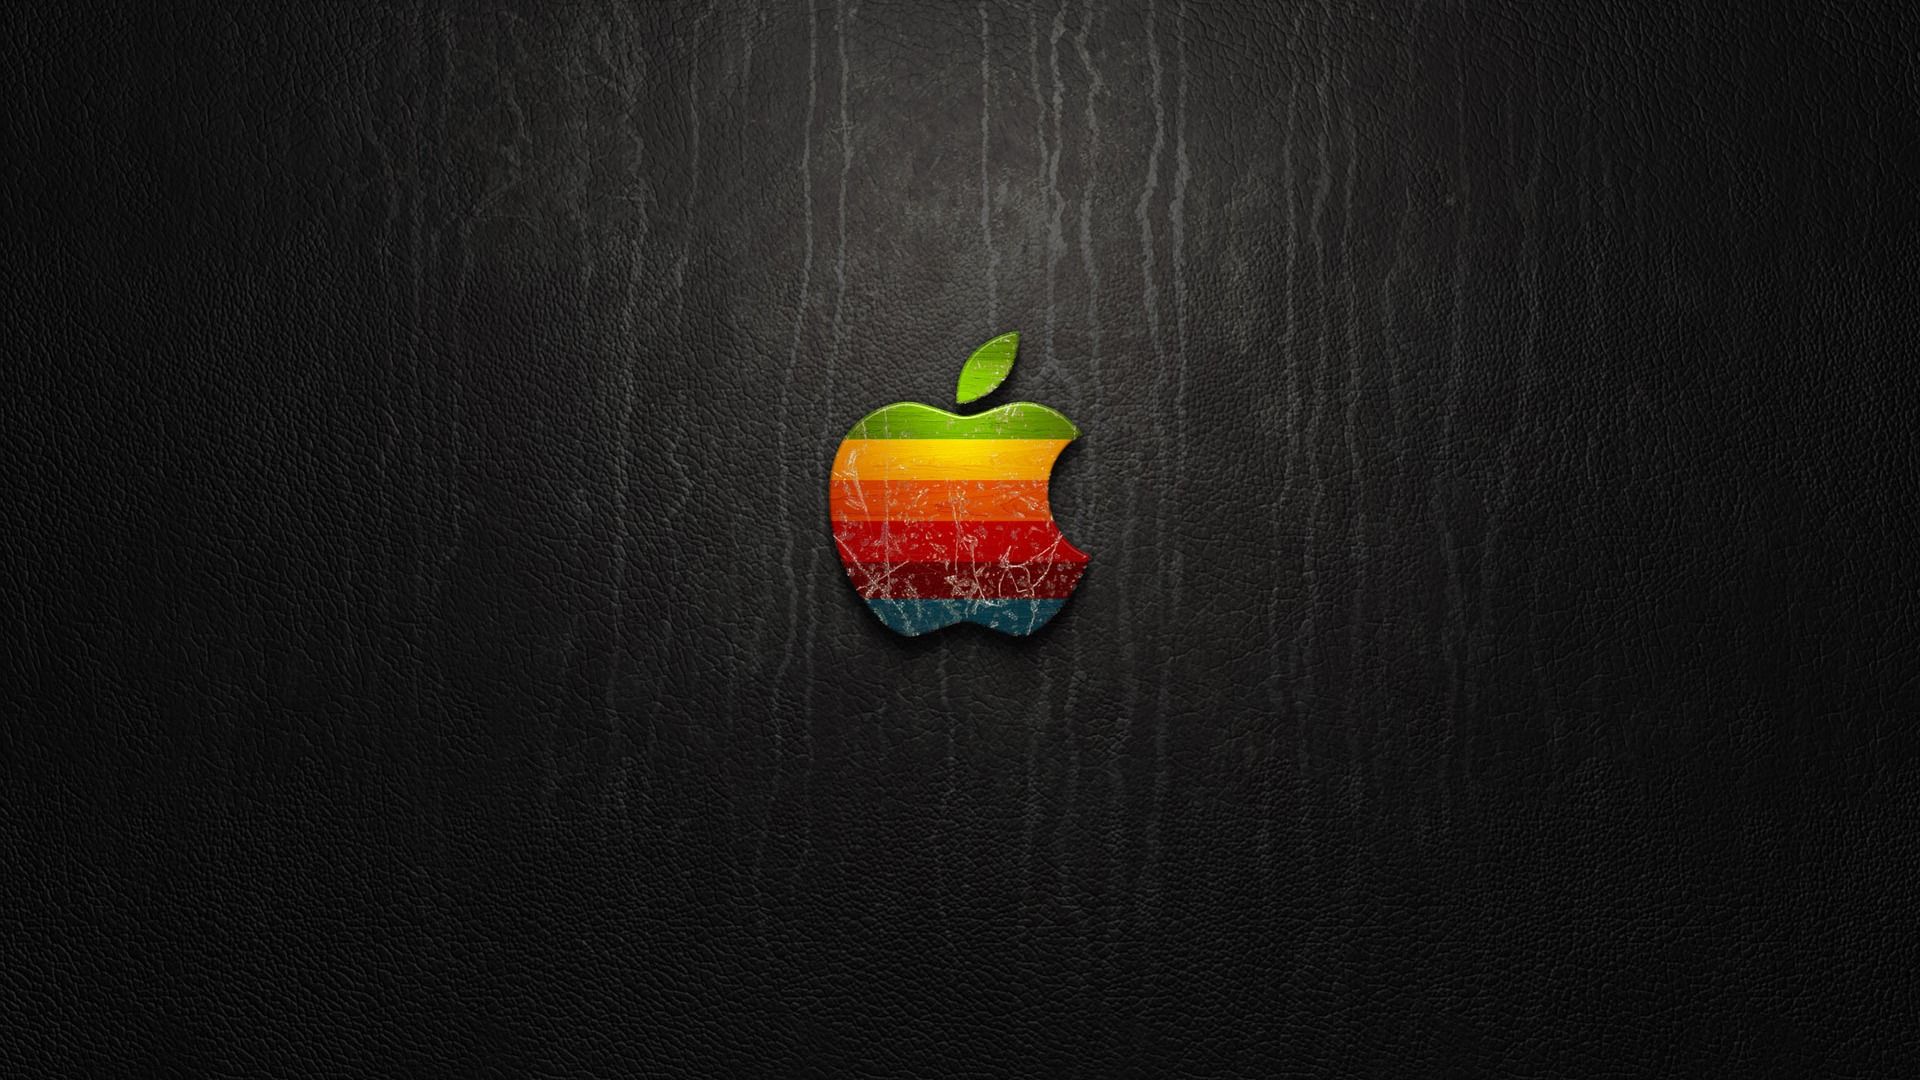 Wallpapers With Apple Logo For Iphone